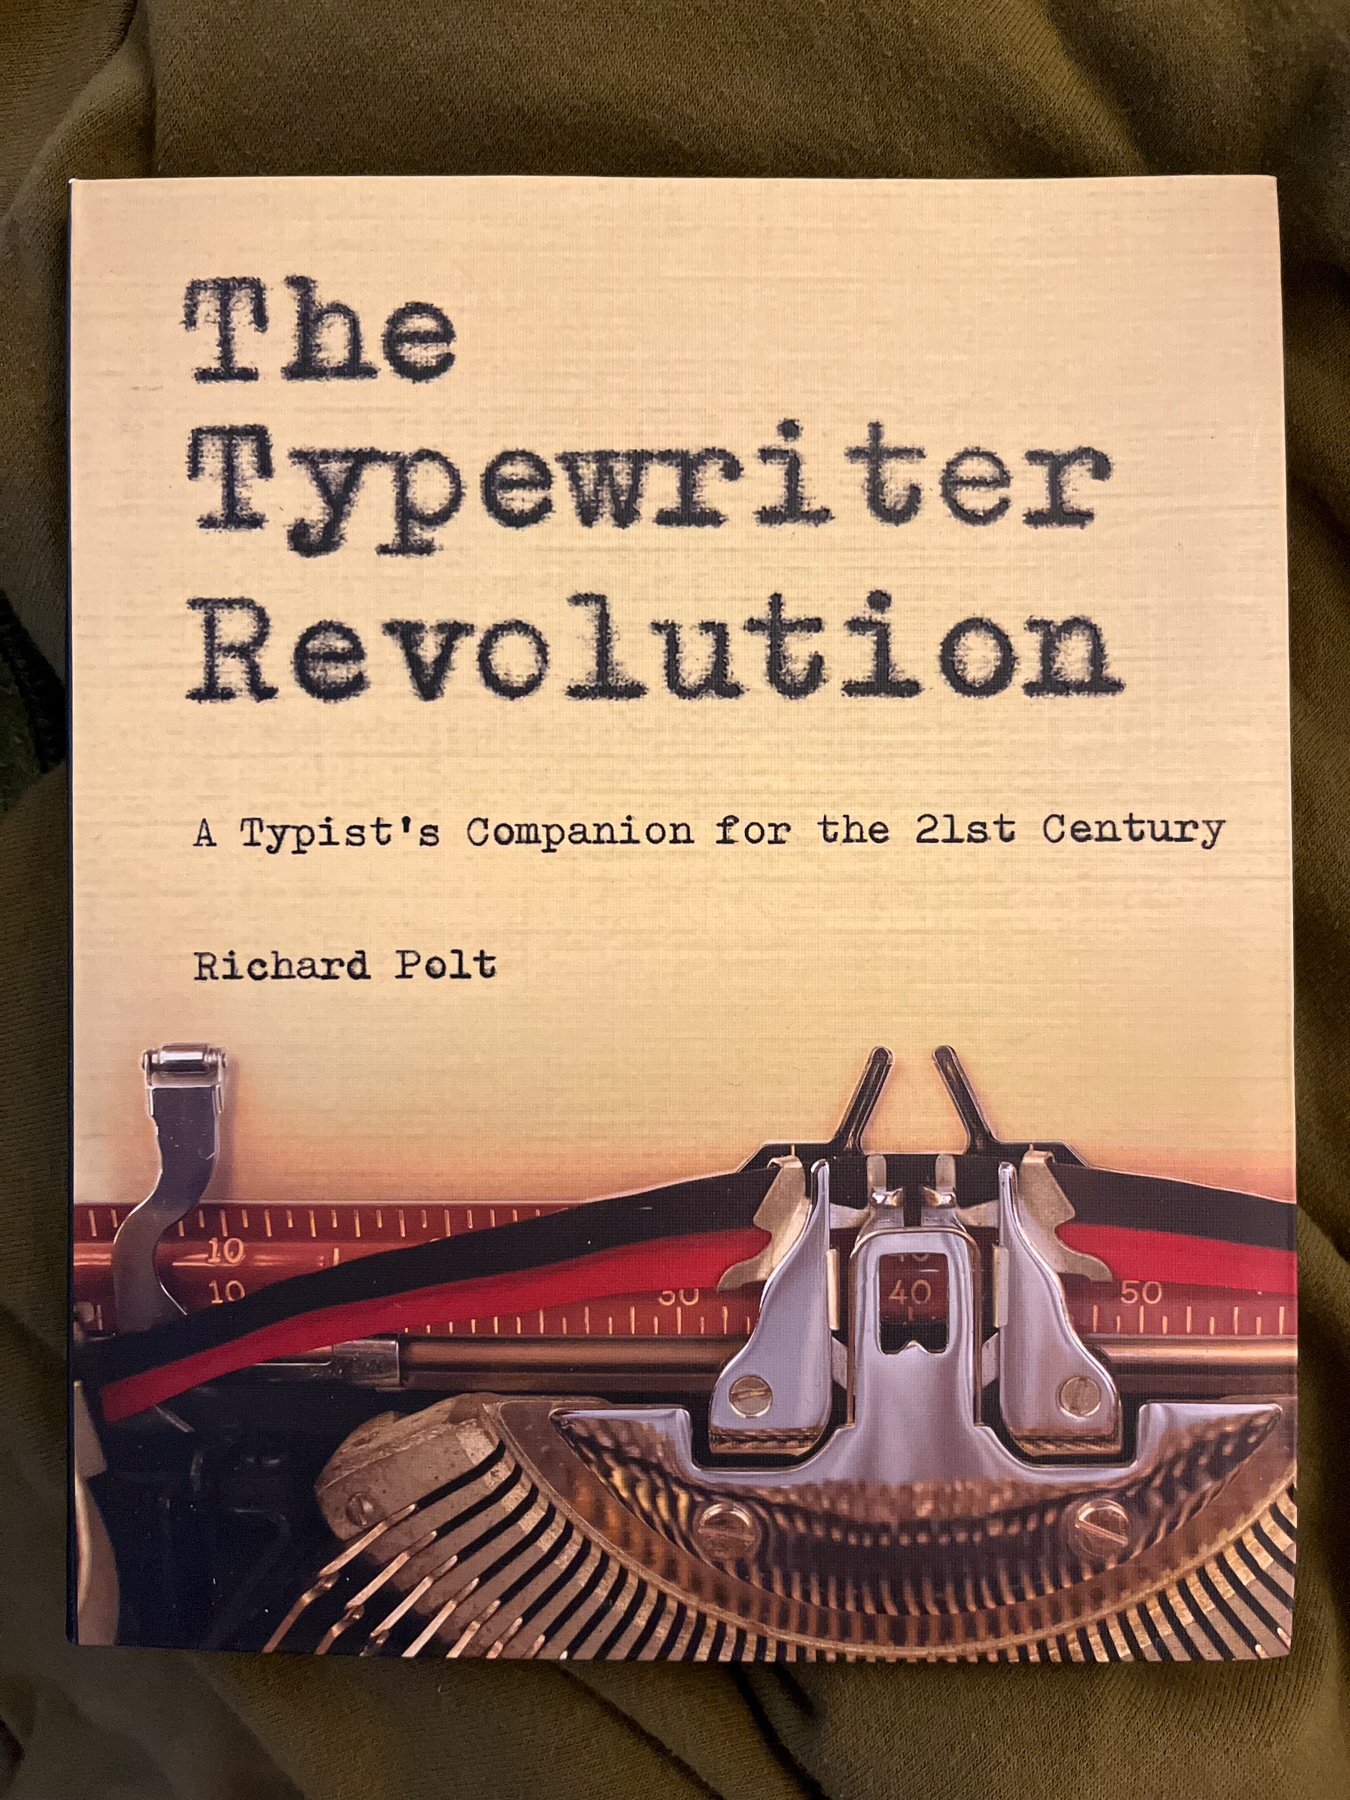 The image shows the cover of a book titled "The Typewriter Revolution: A Typist's Companion for the 21st Century" by Richard Polt. The cover features an image of a typewriter.